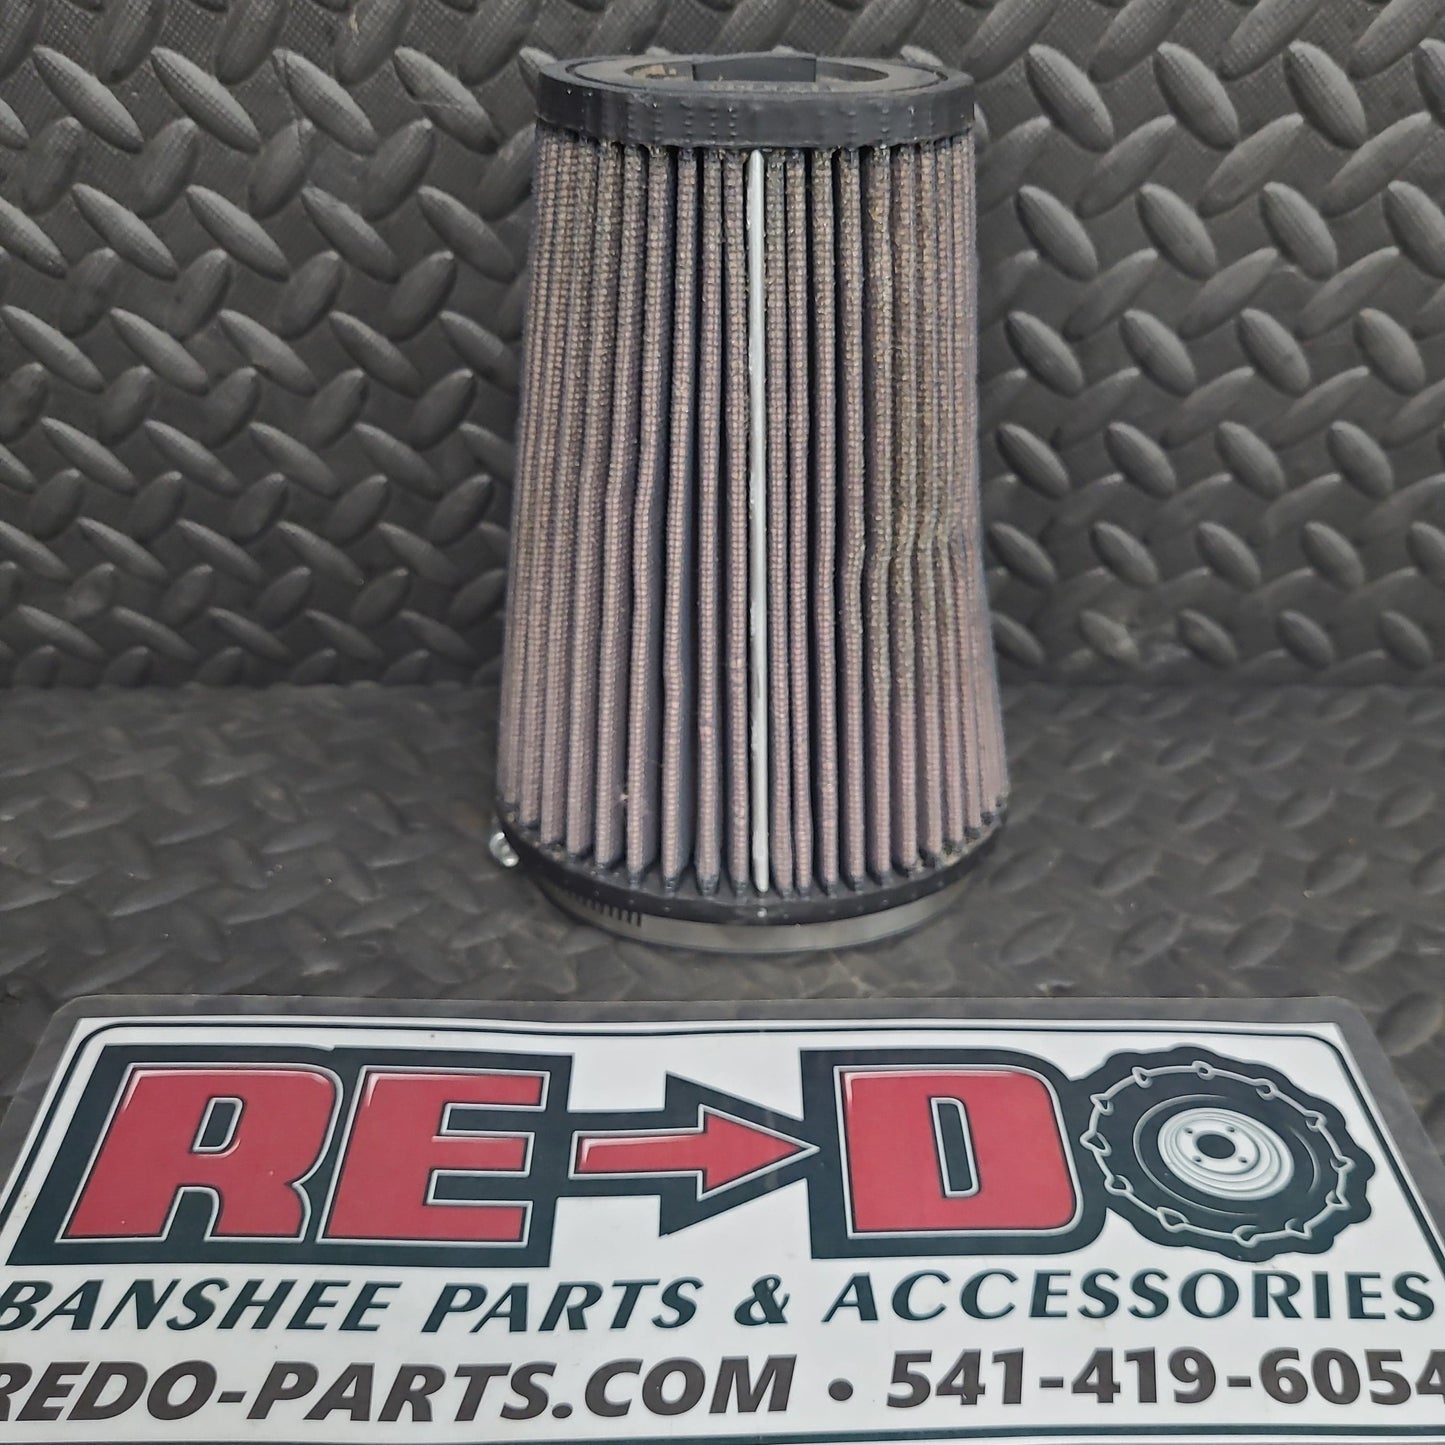 KN Air Filter Cone, 6x5, Fits OEM Flange *USED*